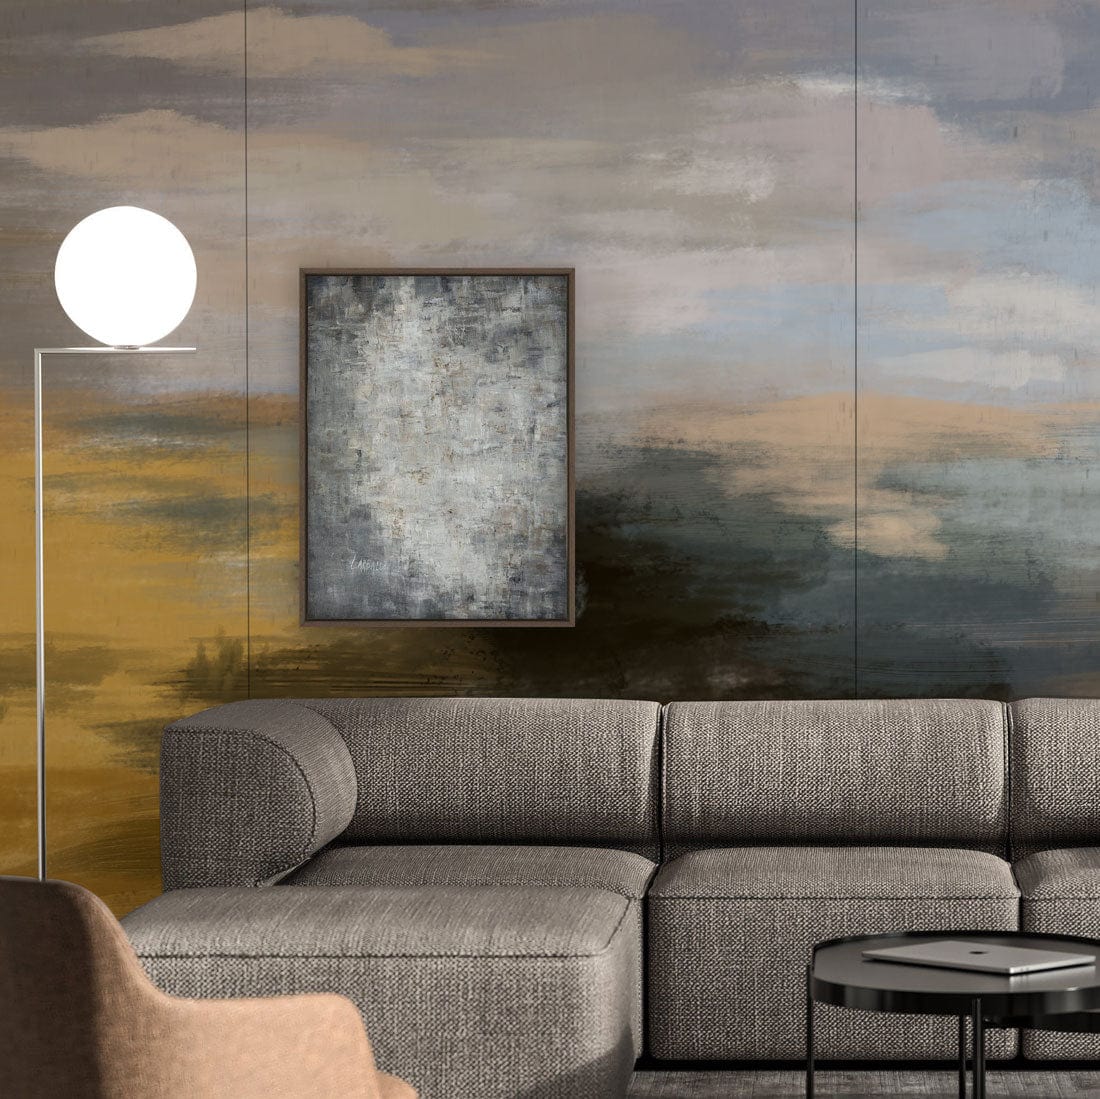 mural wallpaper painting with an abstract painting design for interior use in the living room